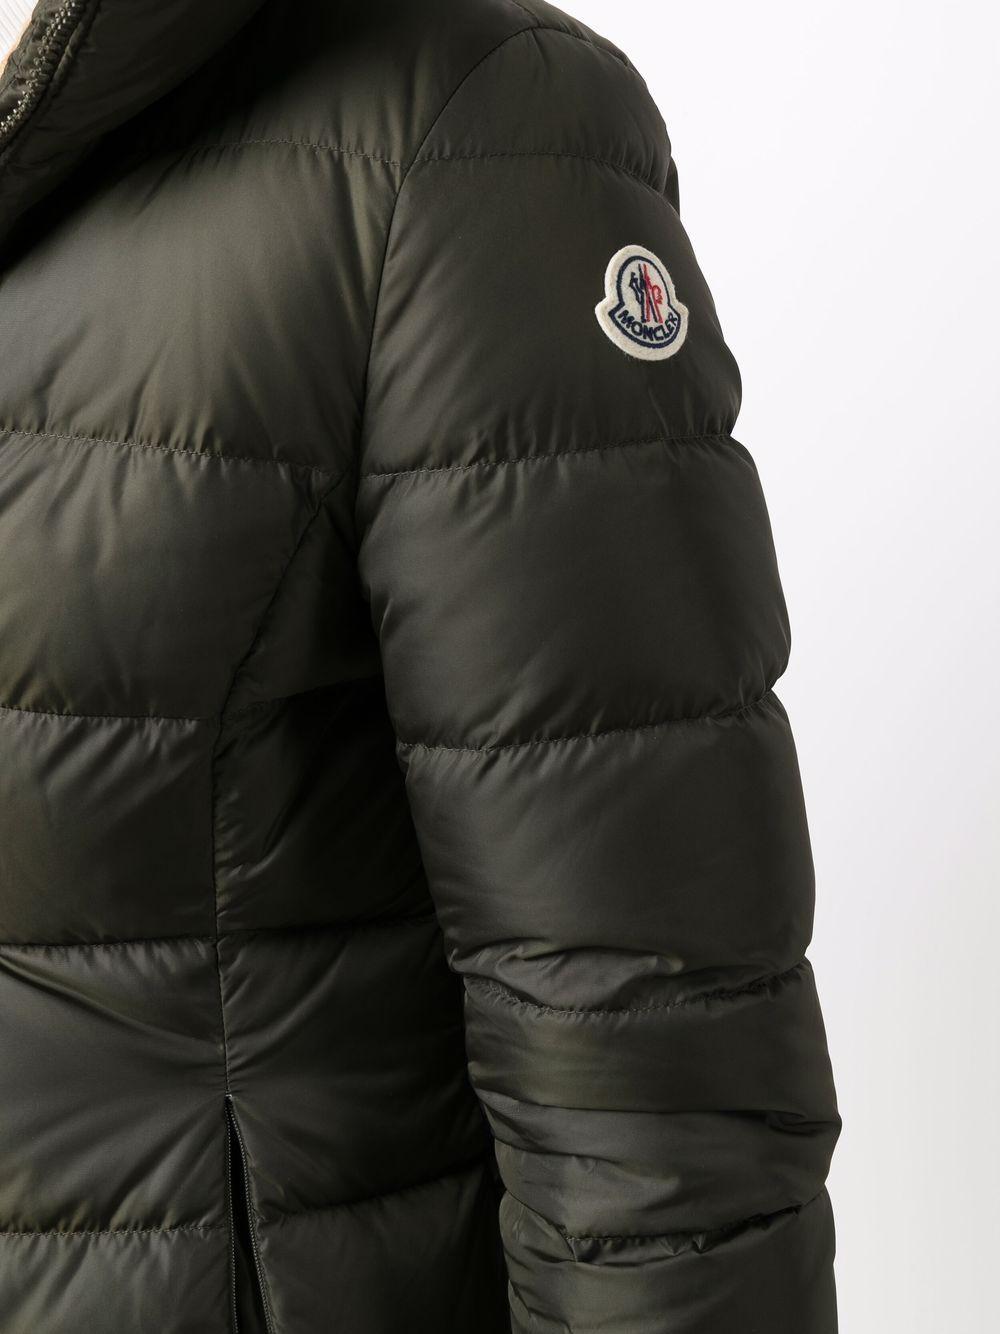 Moncler Gie Padded Jacket in Green - Lyst